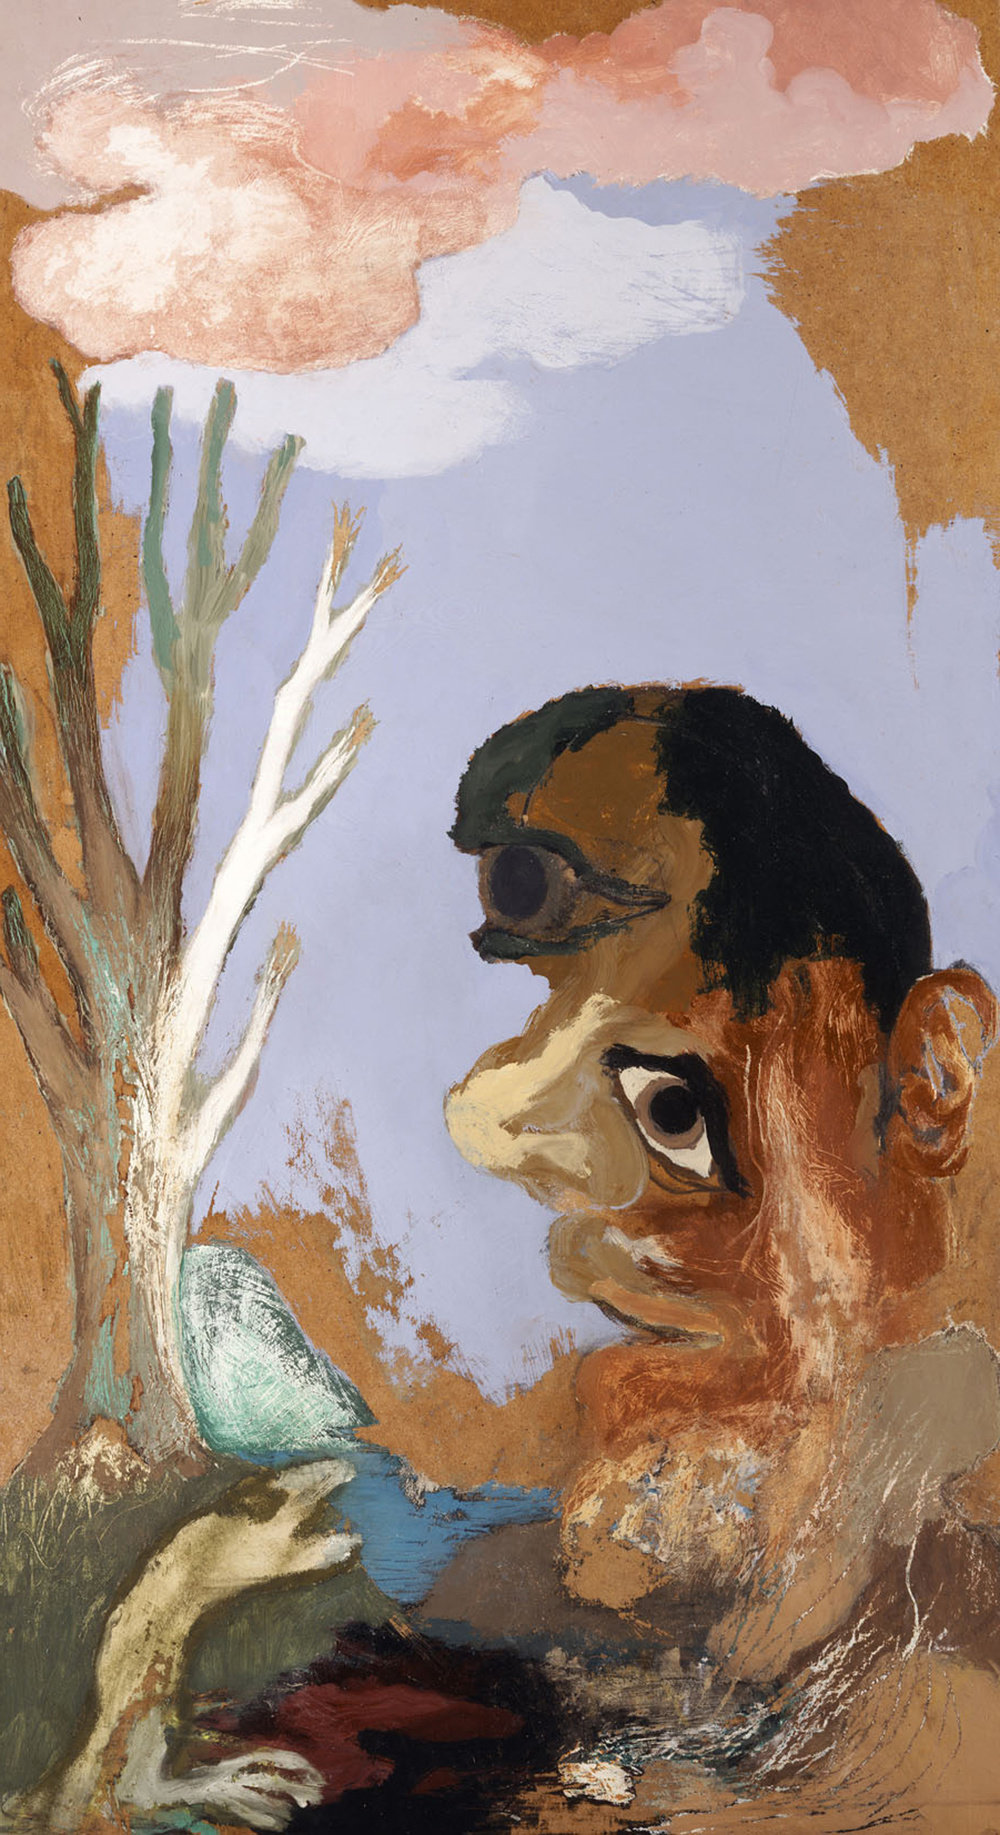 Kiff, white tree, large face, 1990 91, acrylic on canvas, 48 x 27 in., 121.9 x 68.6 cm, 304855